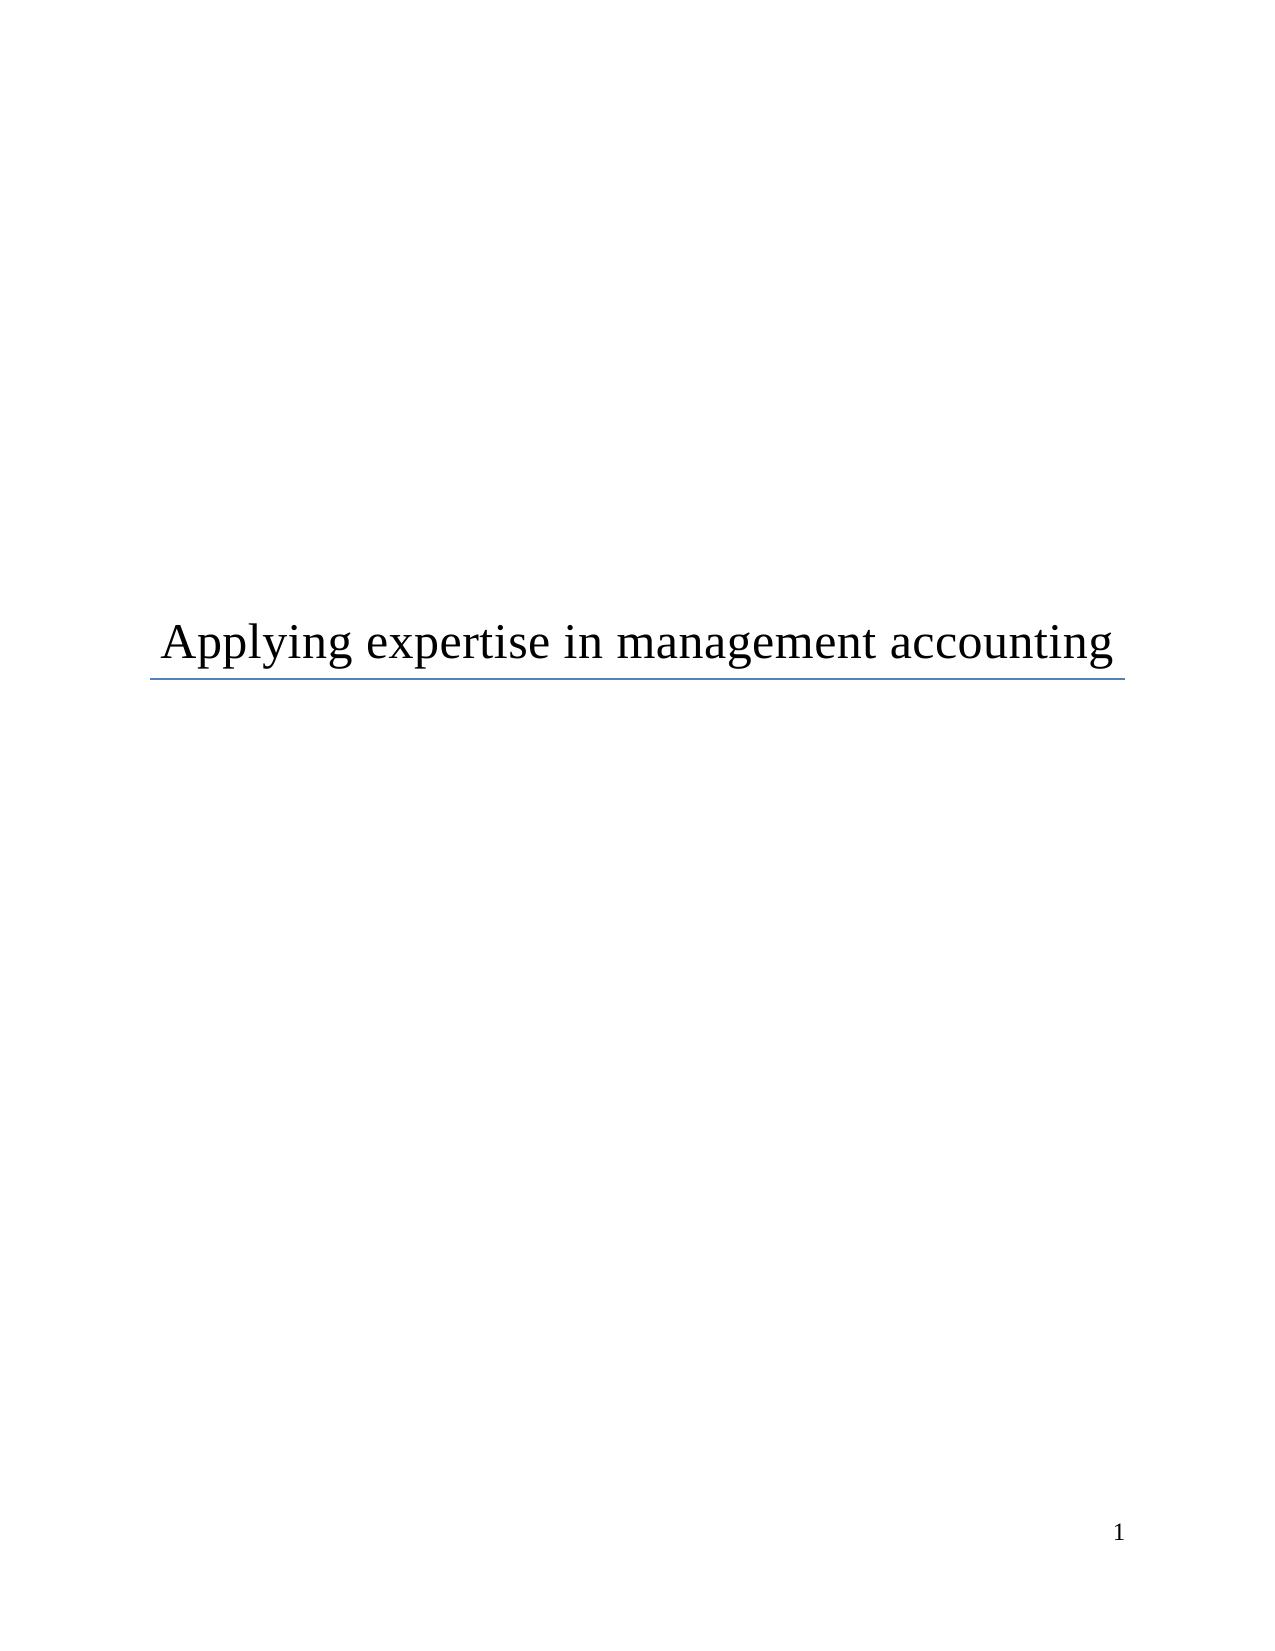 Applying Expertise in Management Accounting_1